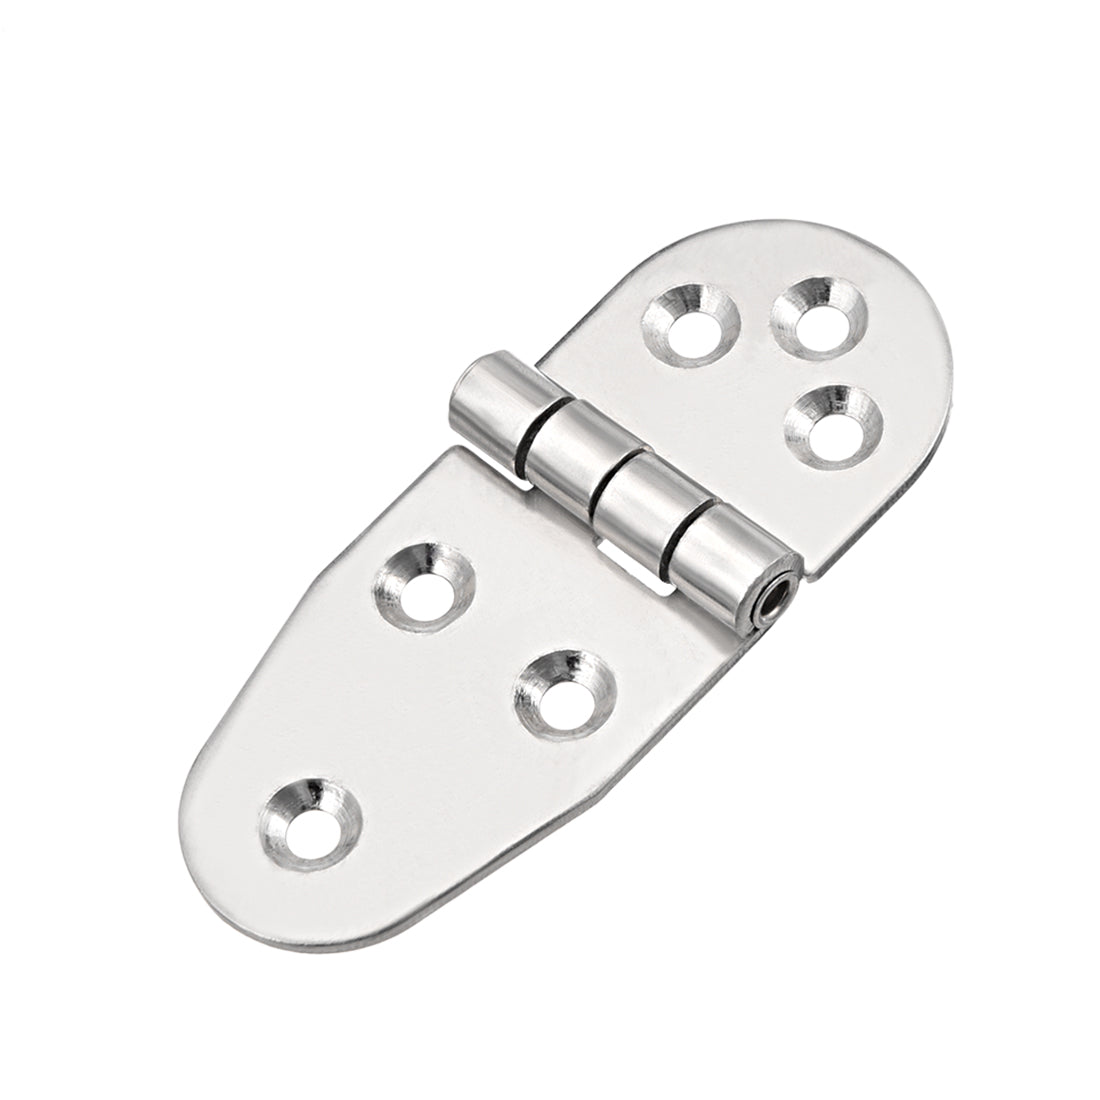 uxcell Uxcell T-Strap Heavy Shed Hinge Gate Door Hinges 304 Stainless Steel, 100mm Overall Length